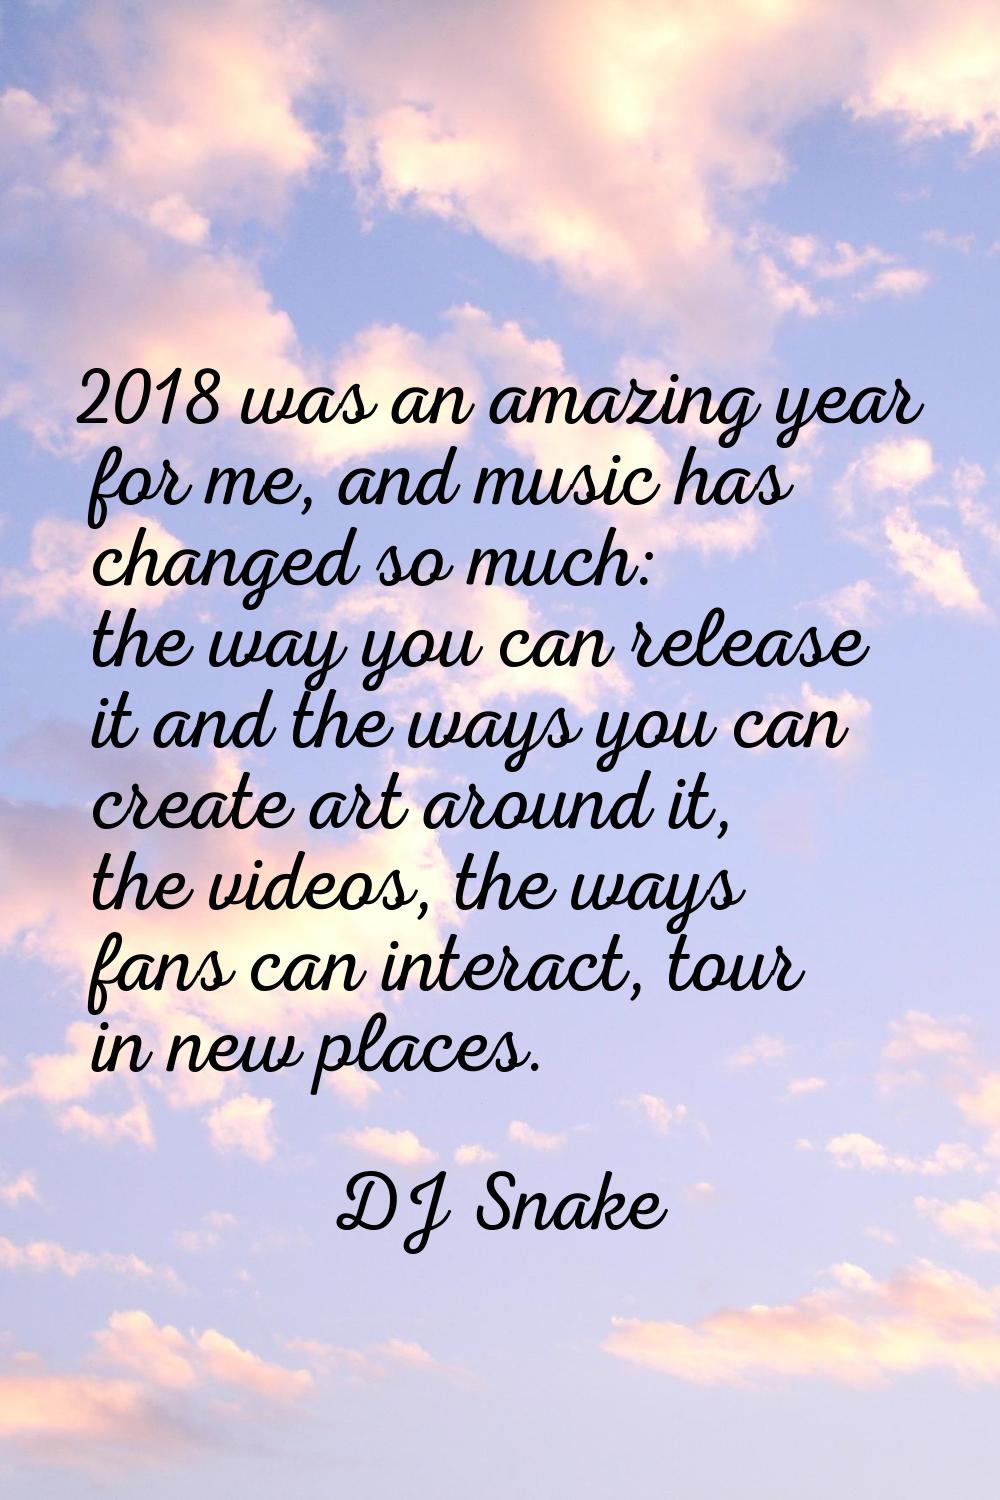 2018 was an amazing year for me, and music has changed so much: the way you can release it and the 